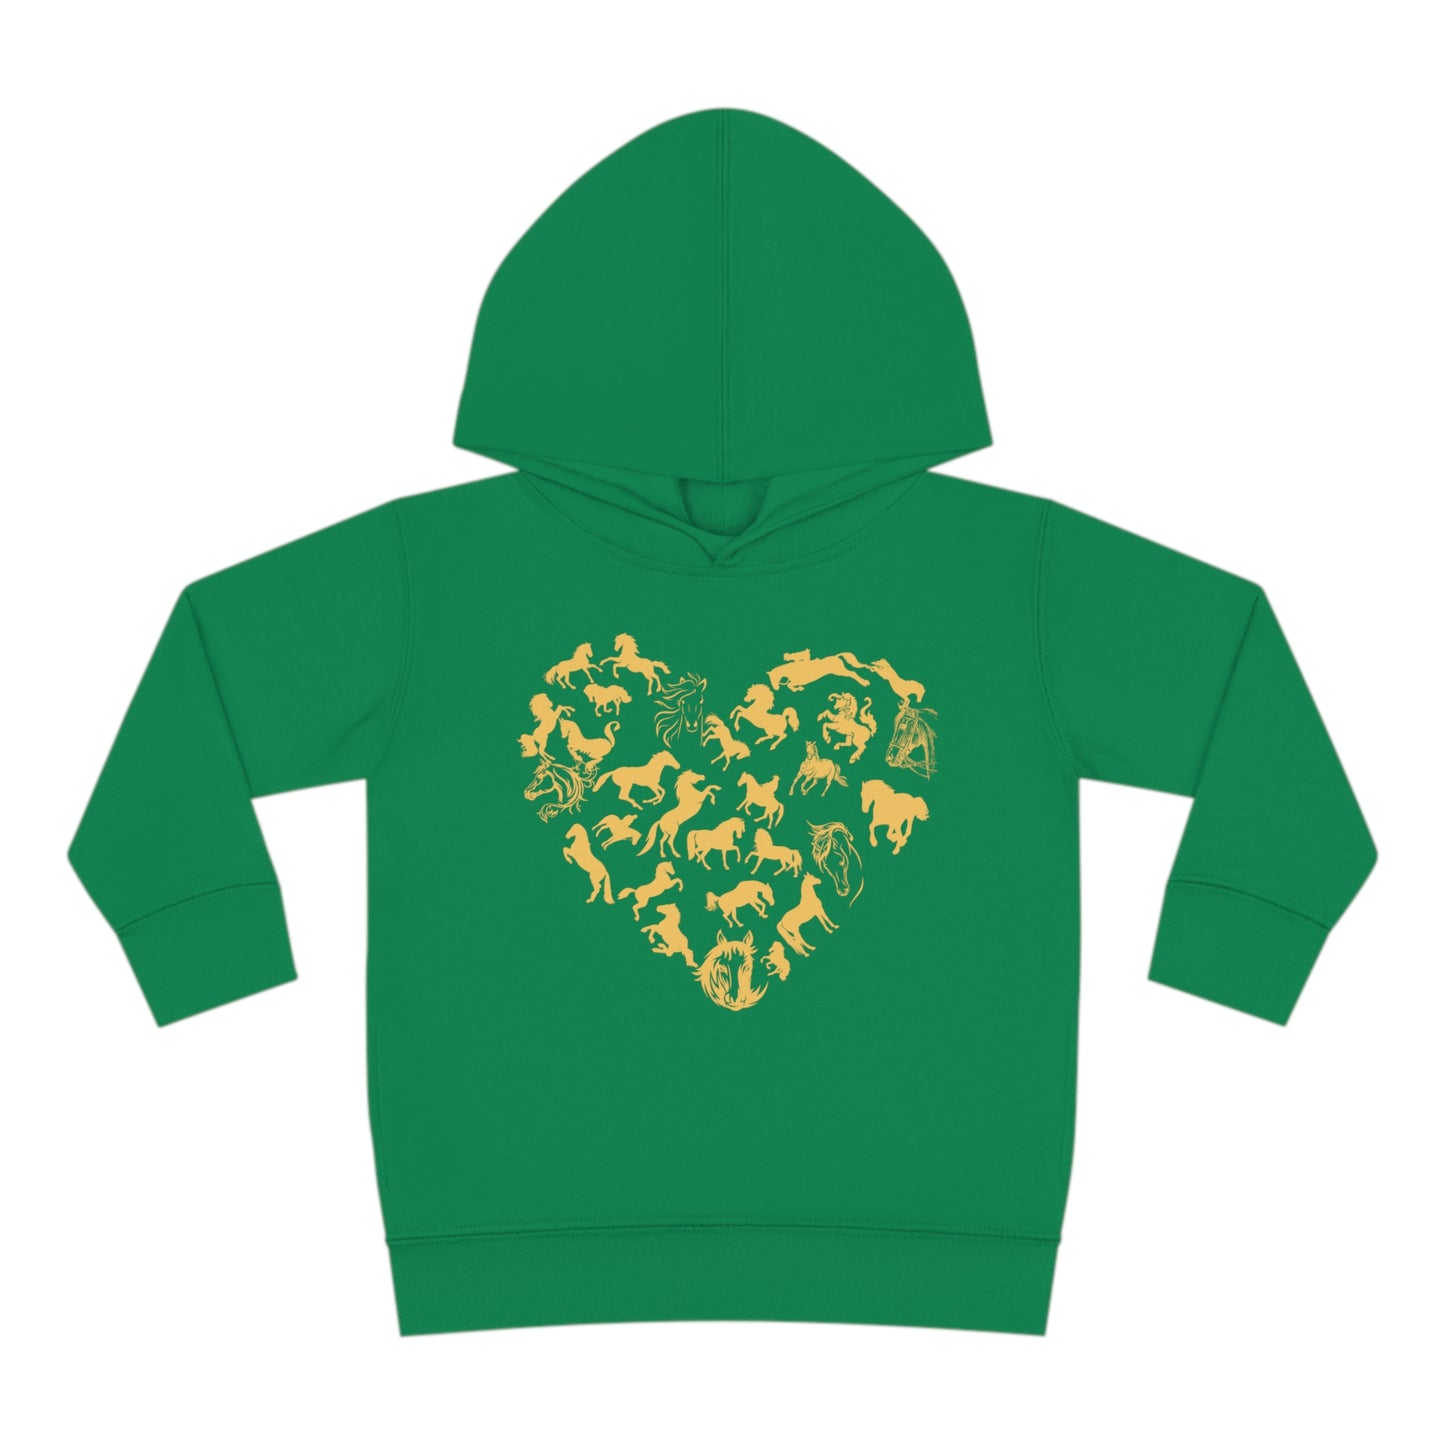 Horse Heart Hoodie | Horse Lover Tee - Horses Heart Toddler - Horse Lover Gift - Horse Toddler Shirt - Equestrian Tee - Gift for Horse Owner Kids clothes Kelly 2T 